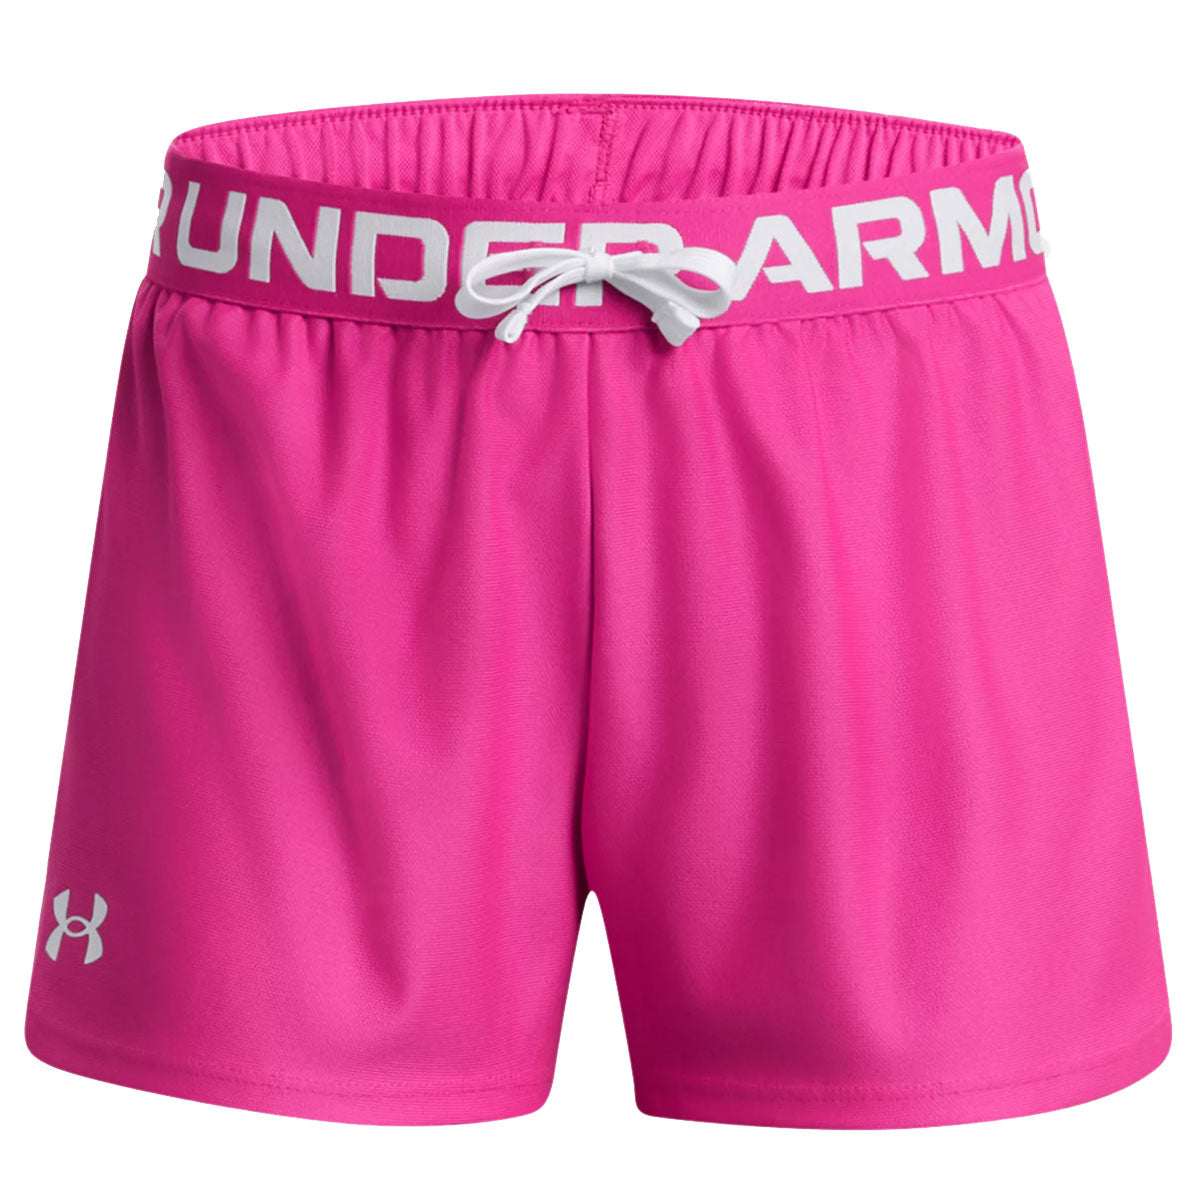 Under Armour Play Up Shorts - Girls - Rebel Pink/White